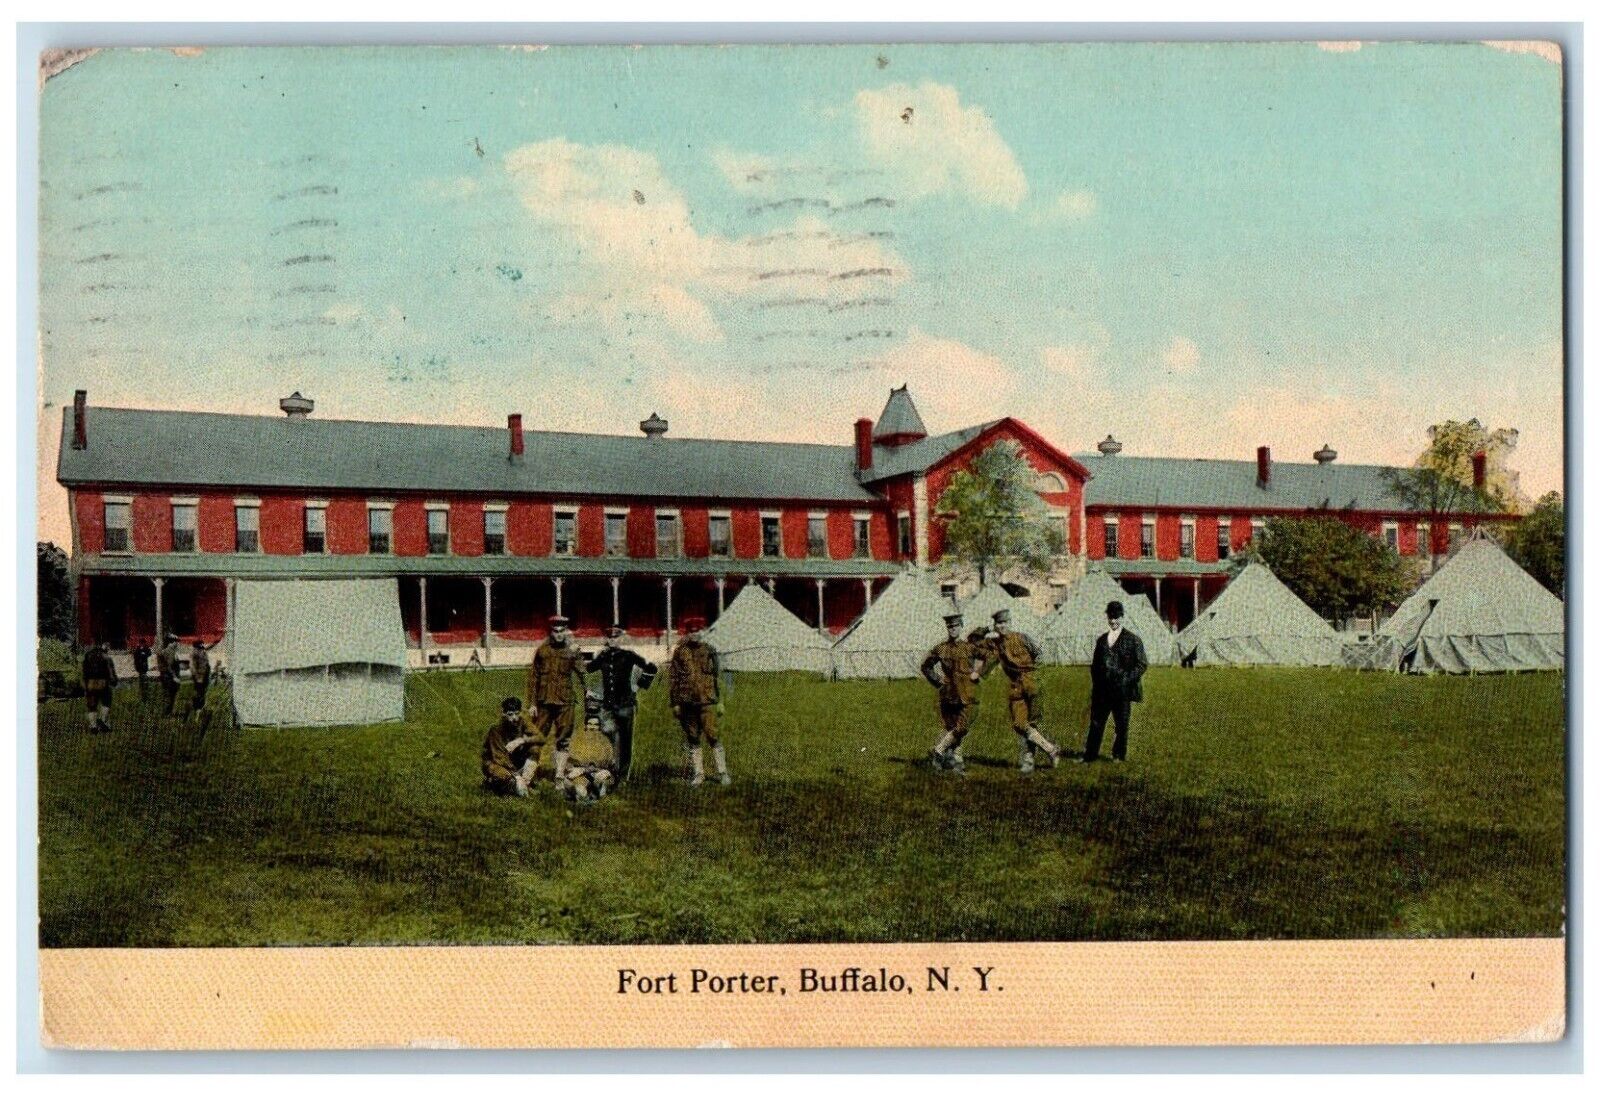 1912 Fort Porter Military Soldier Buffalo New York NY Posted Antique Postcard